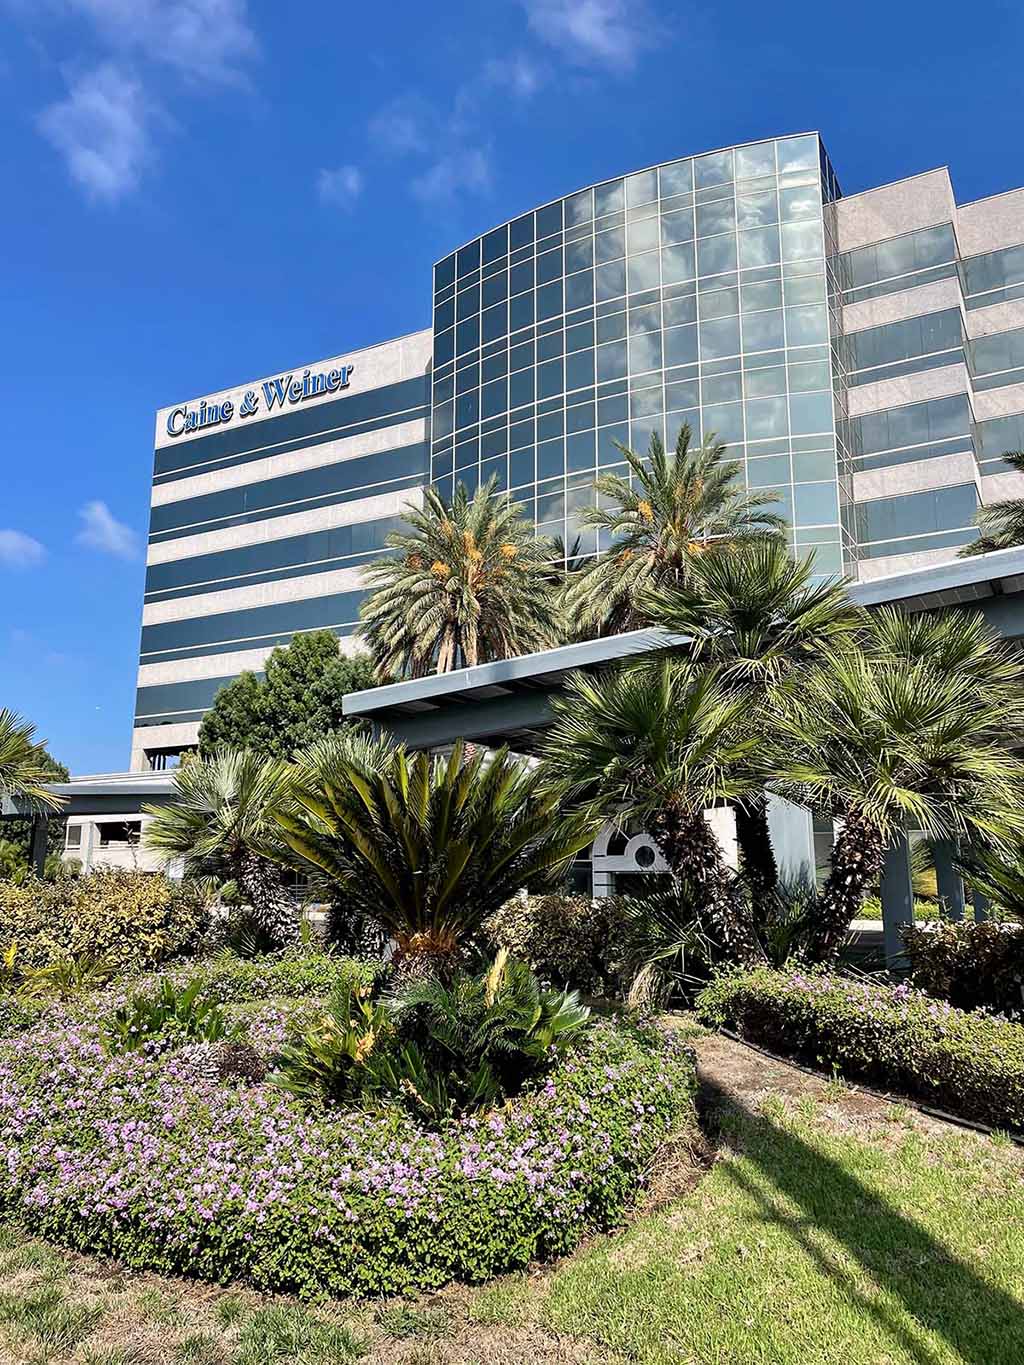 Southern California Multi-Specialty Center serves patients from Glendale